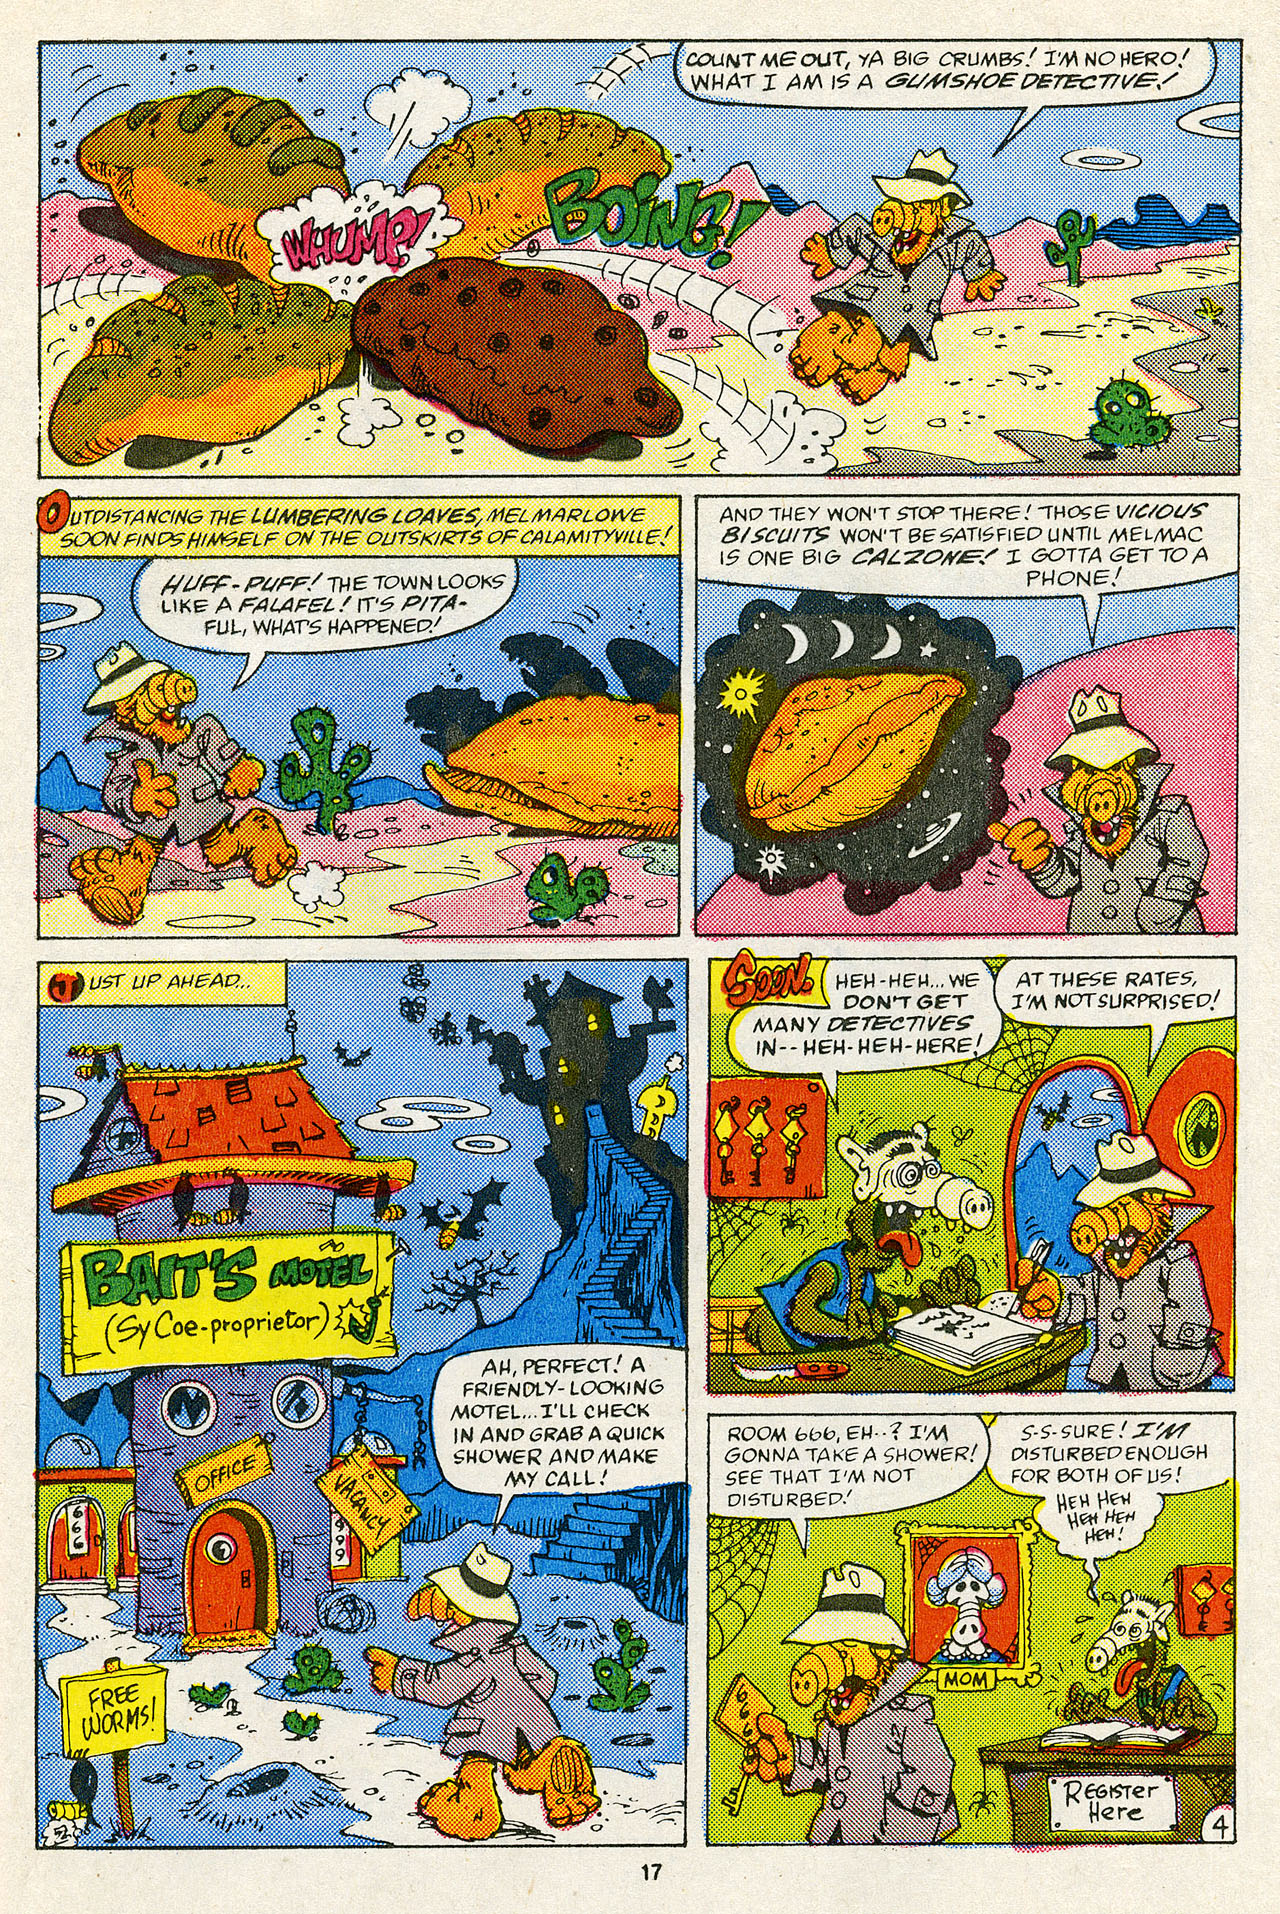 Alf Issue 14 | Read Alf Issue 14 comic online in high 